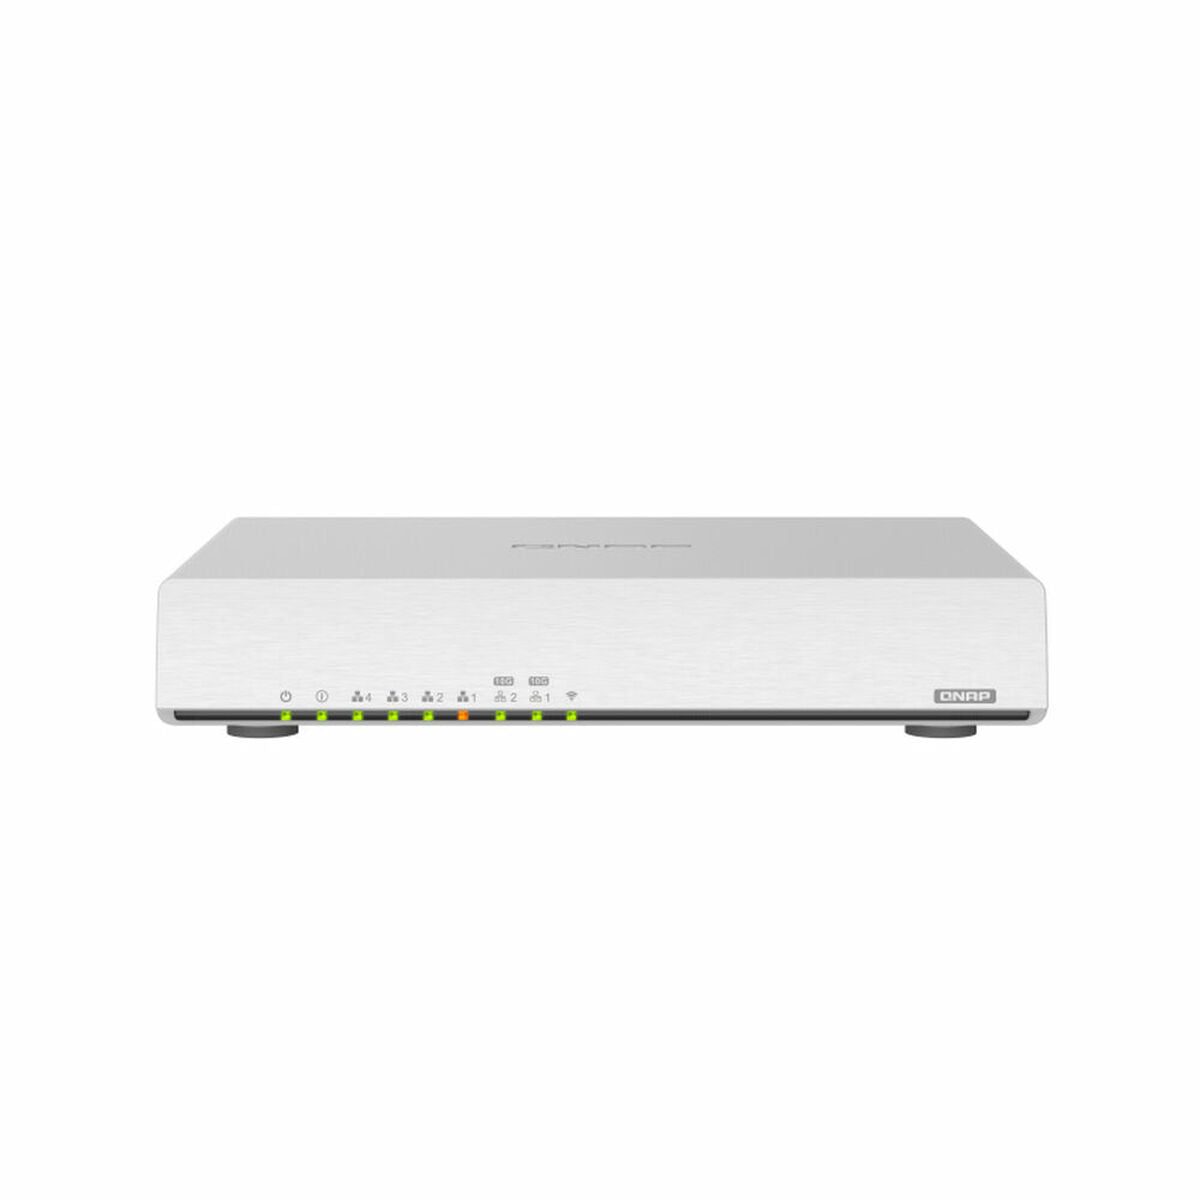 Router Qnap QHora-301W, Qnap, Computing, Network devices, router-qnap-qhora-301w, Brand_Qnap, category-reference-2609, category-reference-2803, category-reference-2826, category-reference-t-19685, category-reference-t-19914, Condition_NEW, networks/wiring, Price_300 - 400, Teleworking, RiotNook